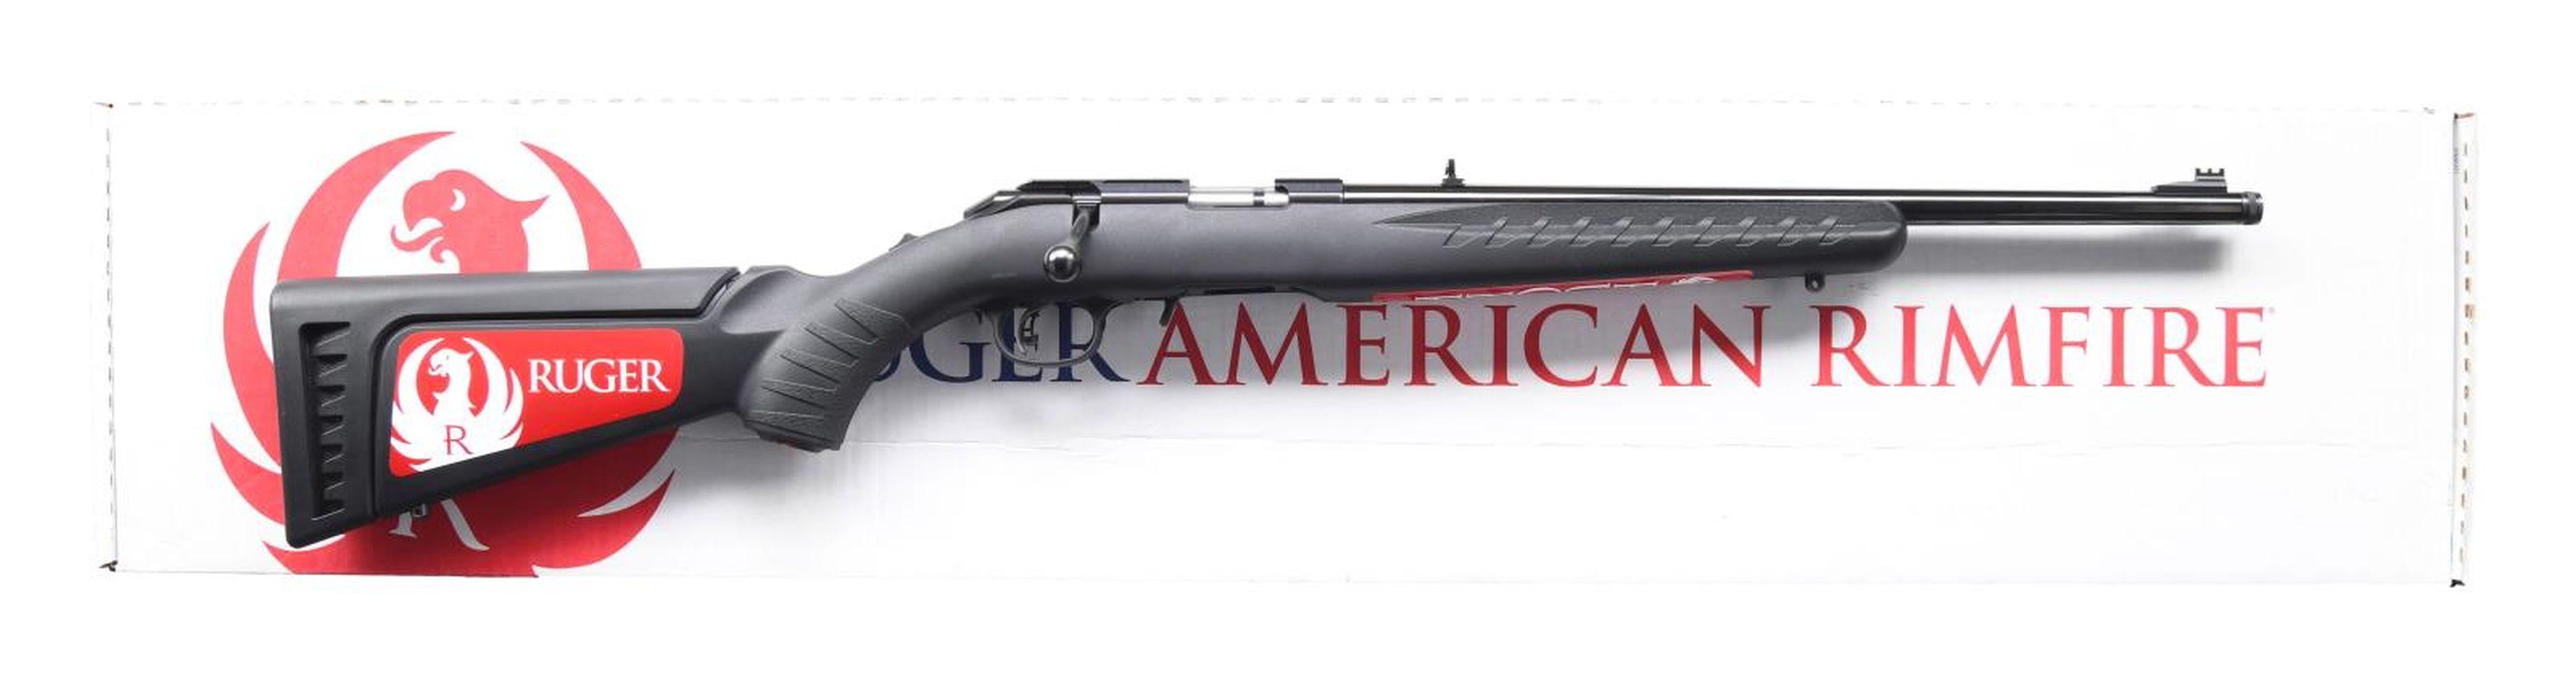 RUGER 17 HMR AMERICAN RIMFIRE BOLT ACTION RIFLE.